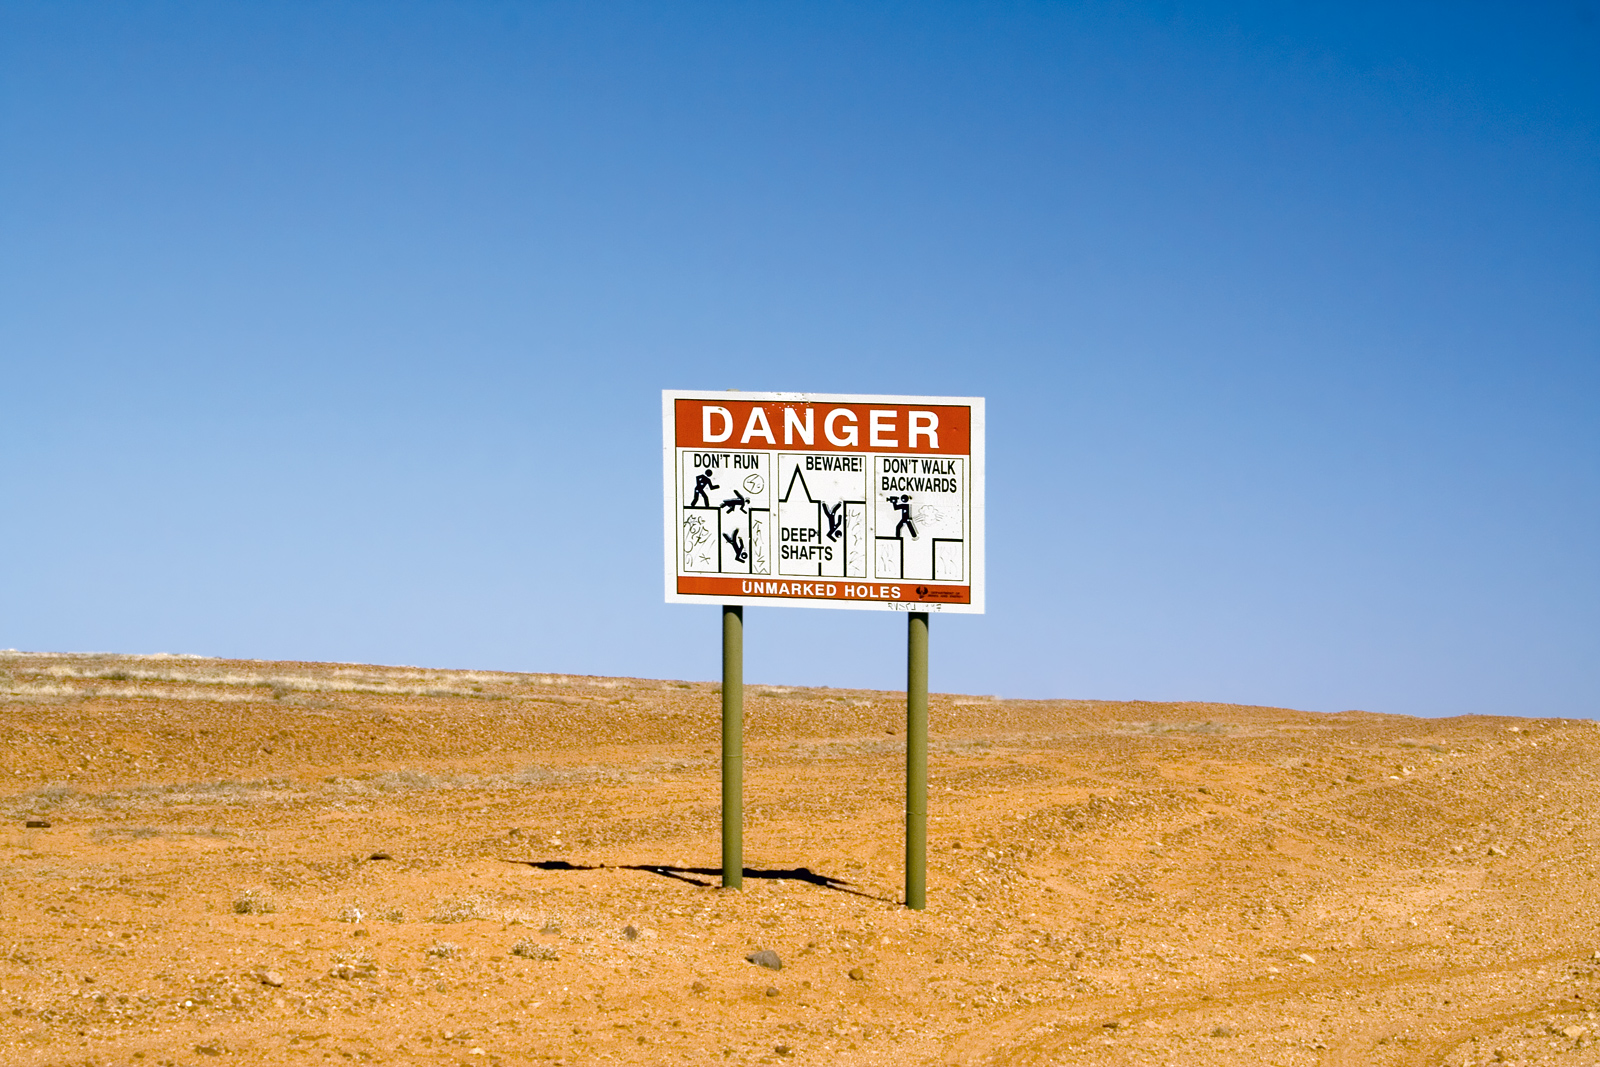 A photograph of a warning sign on the outskirts of Coober Pedy, an opal-mining town in South Australia where excessive heat leads townspeople to build their homes in hillside caves. The advantage of underground living is diminished somewhat by the danger of falling.